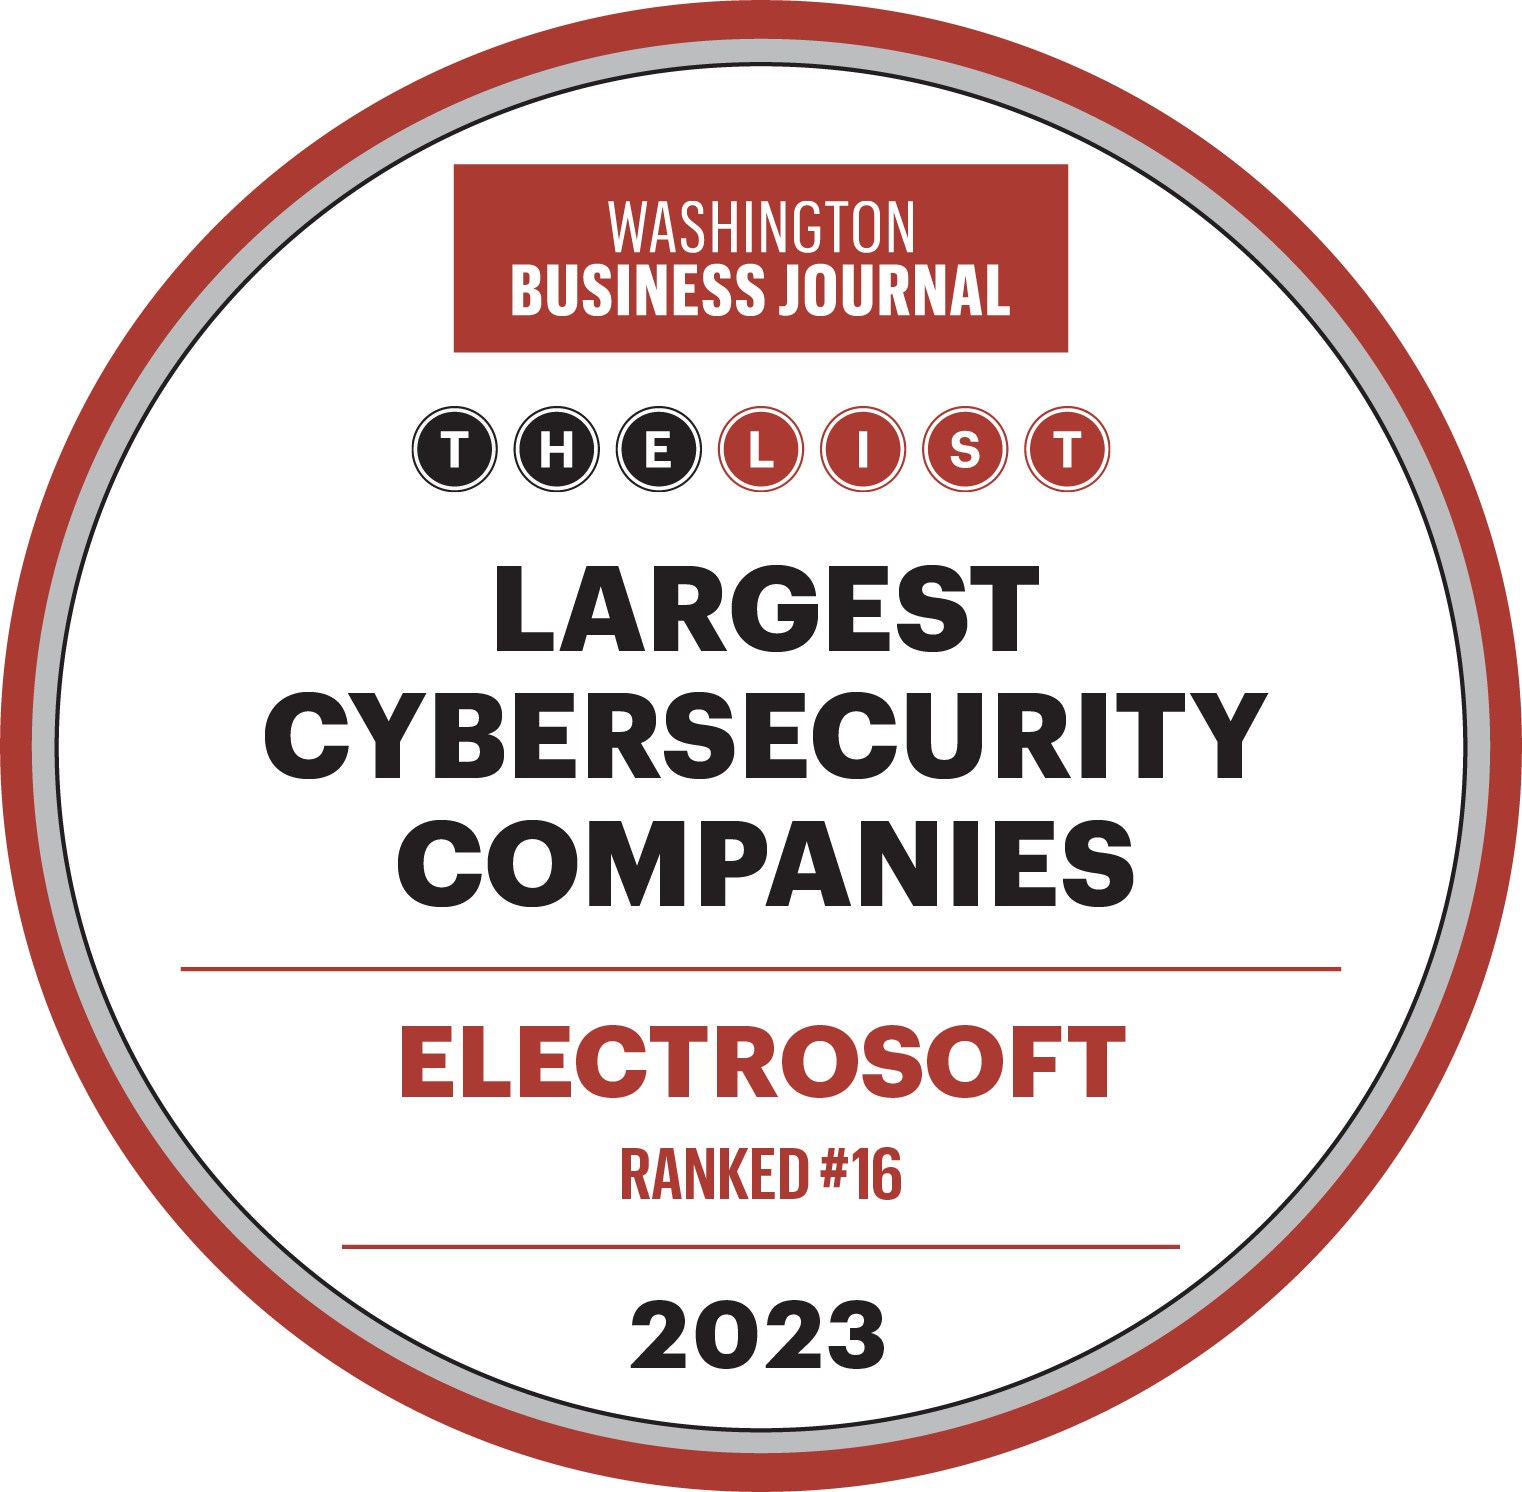 Electrosoft Ranked Among the Largest Cybersecurity Companies